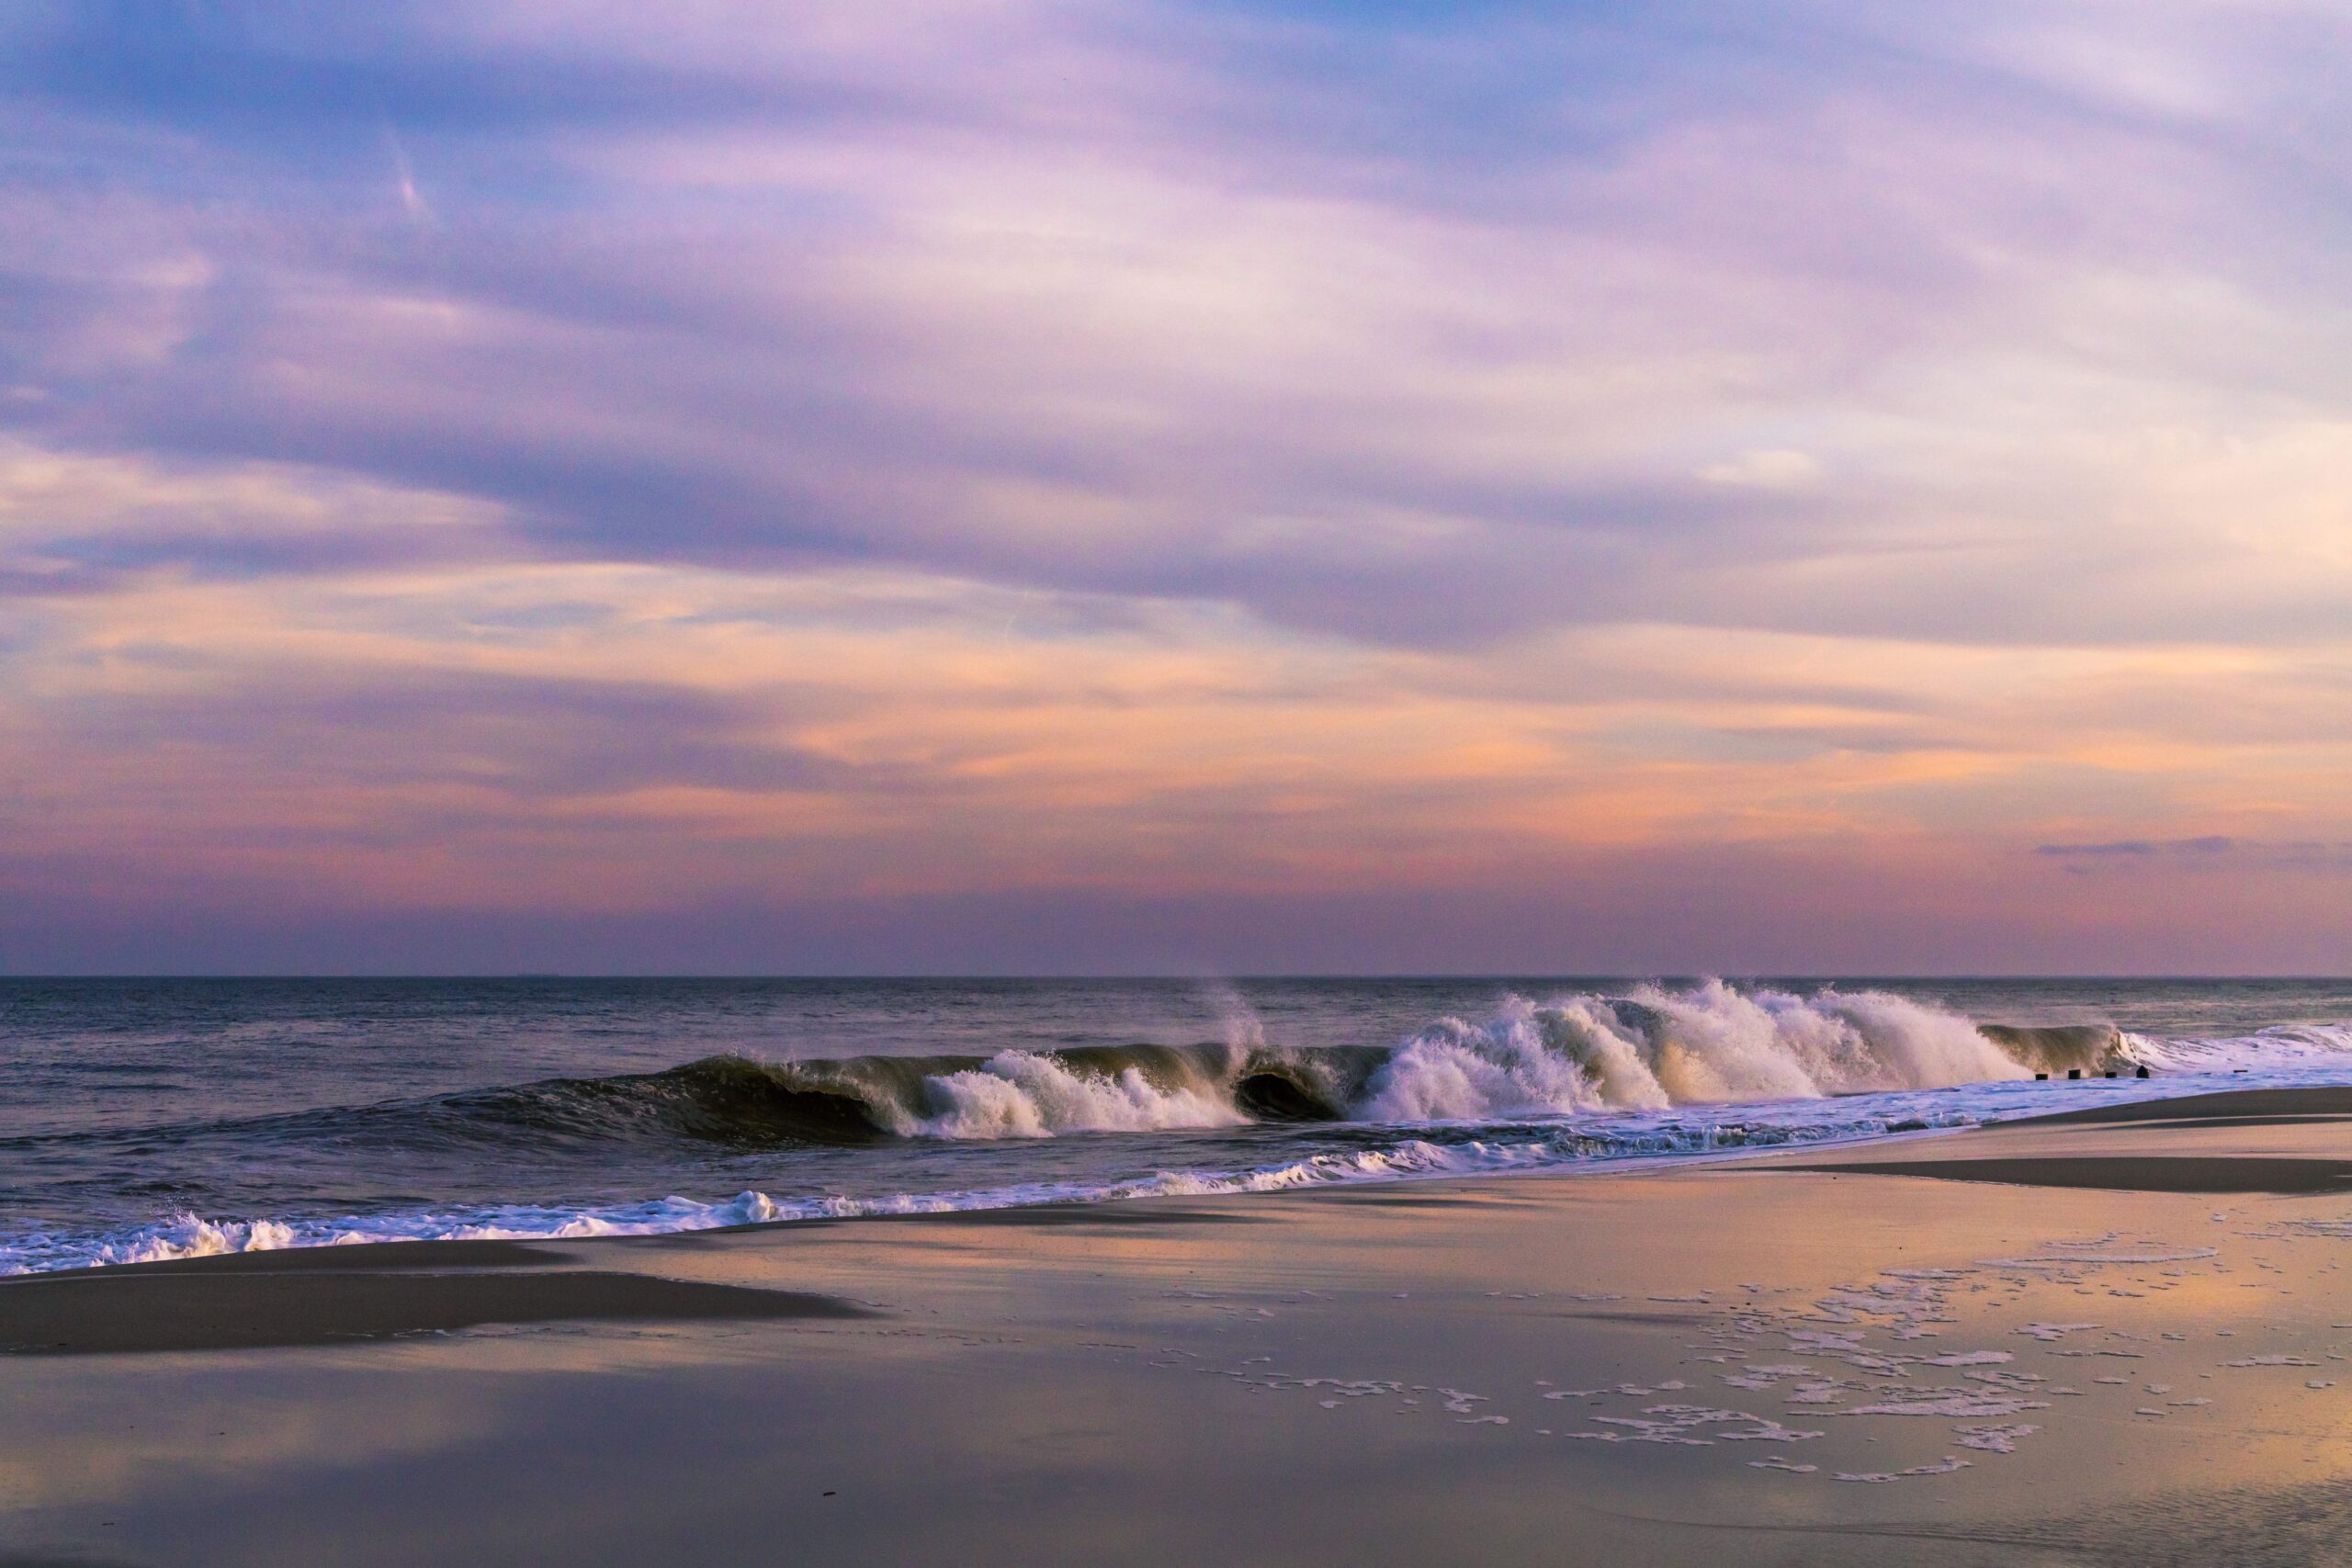 Pink, purple, blue, orange, and yellow clouds in the sky and reflected in the sand with a wave crashing in the ocean